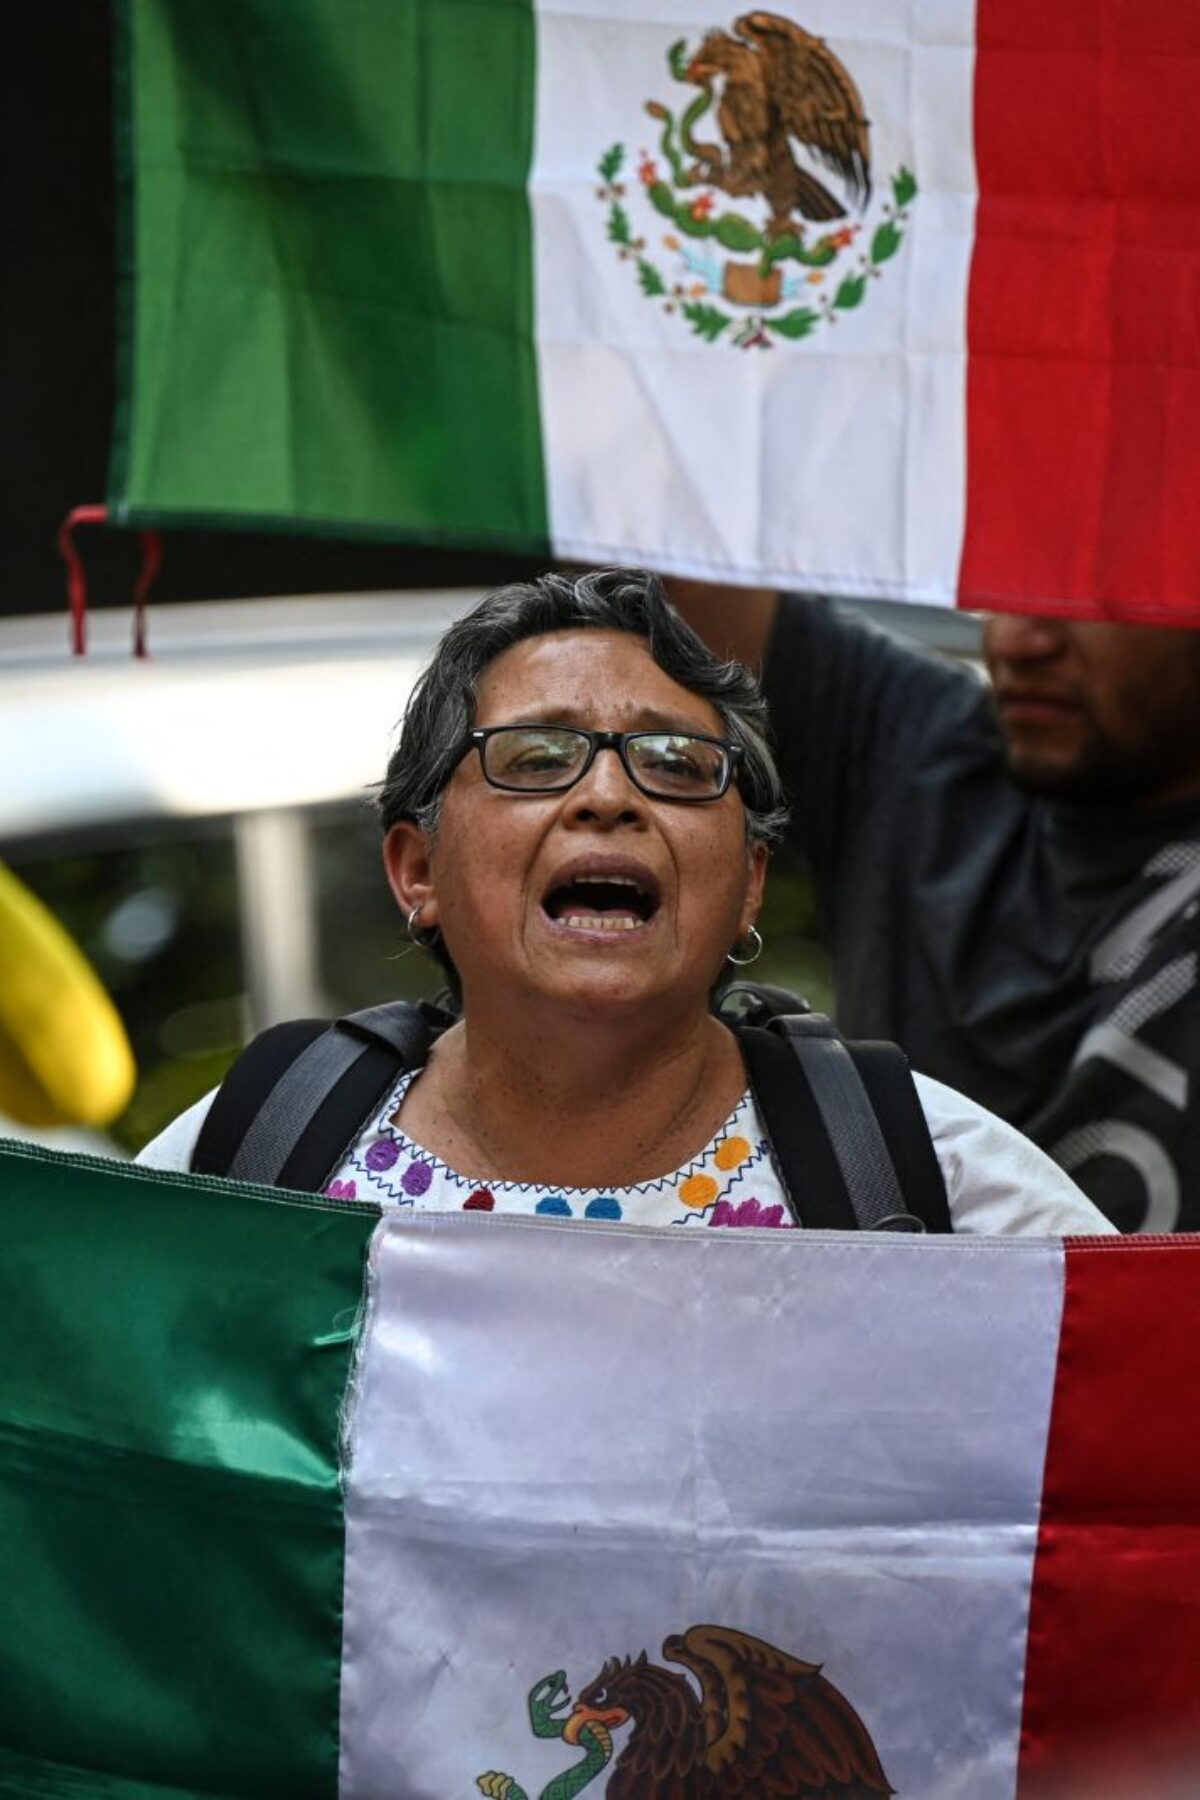 People holding Mexican flags protest outside the Ecuadorian embassy in Mexico City on April 6, 2024, following the severance of diplomatic relations between the Ecuador and Mexico. Ecuadorian authorities stormed the Mexican embassy in Quito on April 5 to arrest former vice president Jorge Glas, who had been granted political asylum there, prompting Mexico to sever diplomatic ties after the 